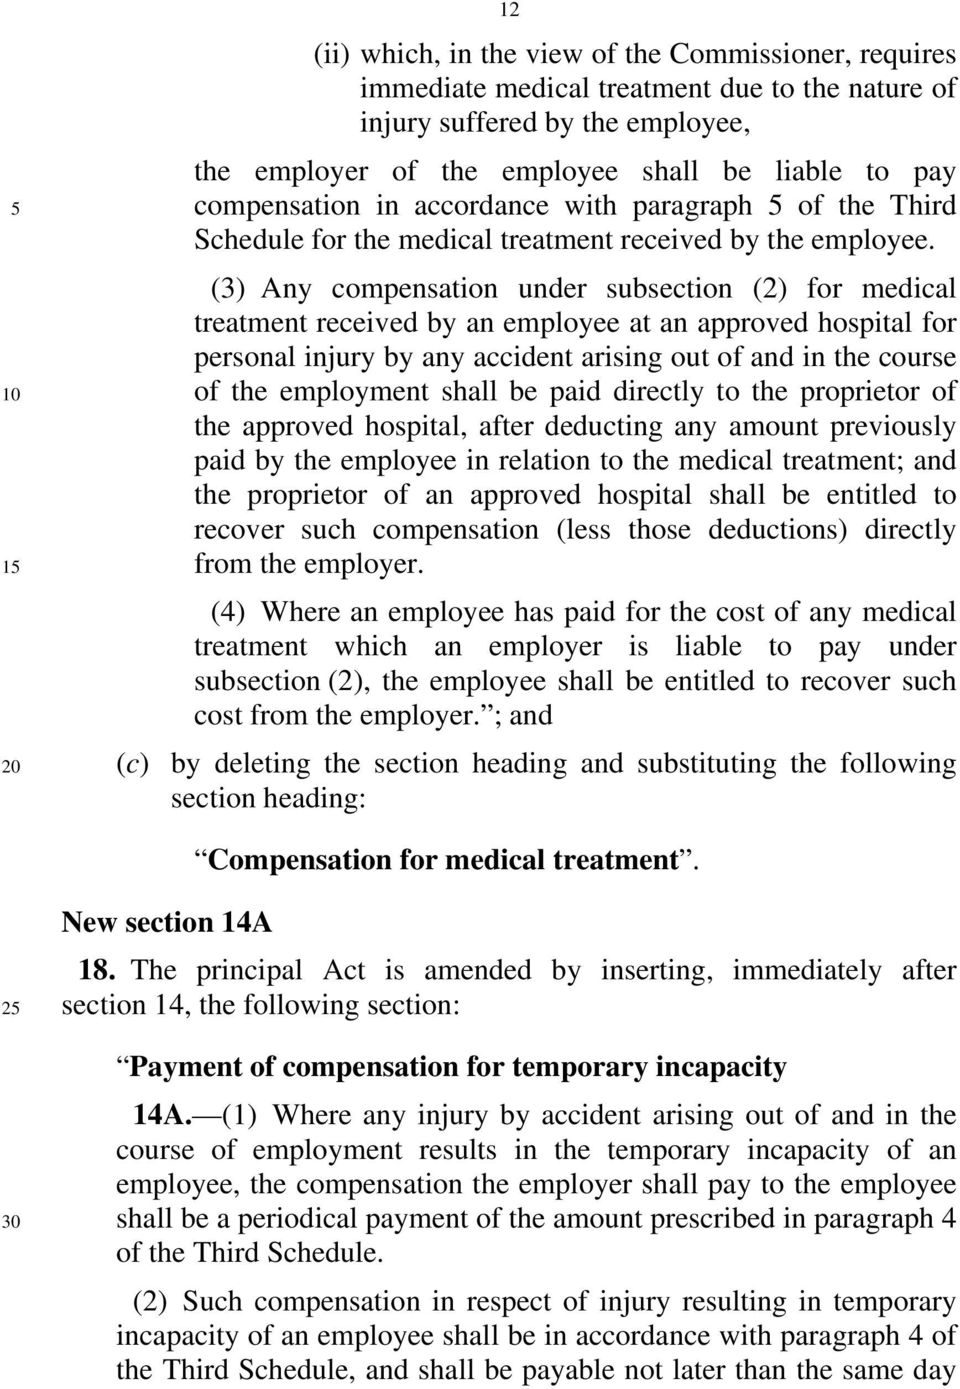 (3) Any compensation under subsection (2) for medical treatment received by an employee at an approved hospital for personal injury by any accident arising out of and in the course of the employment